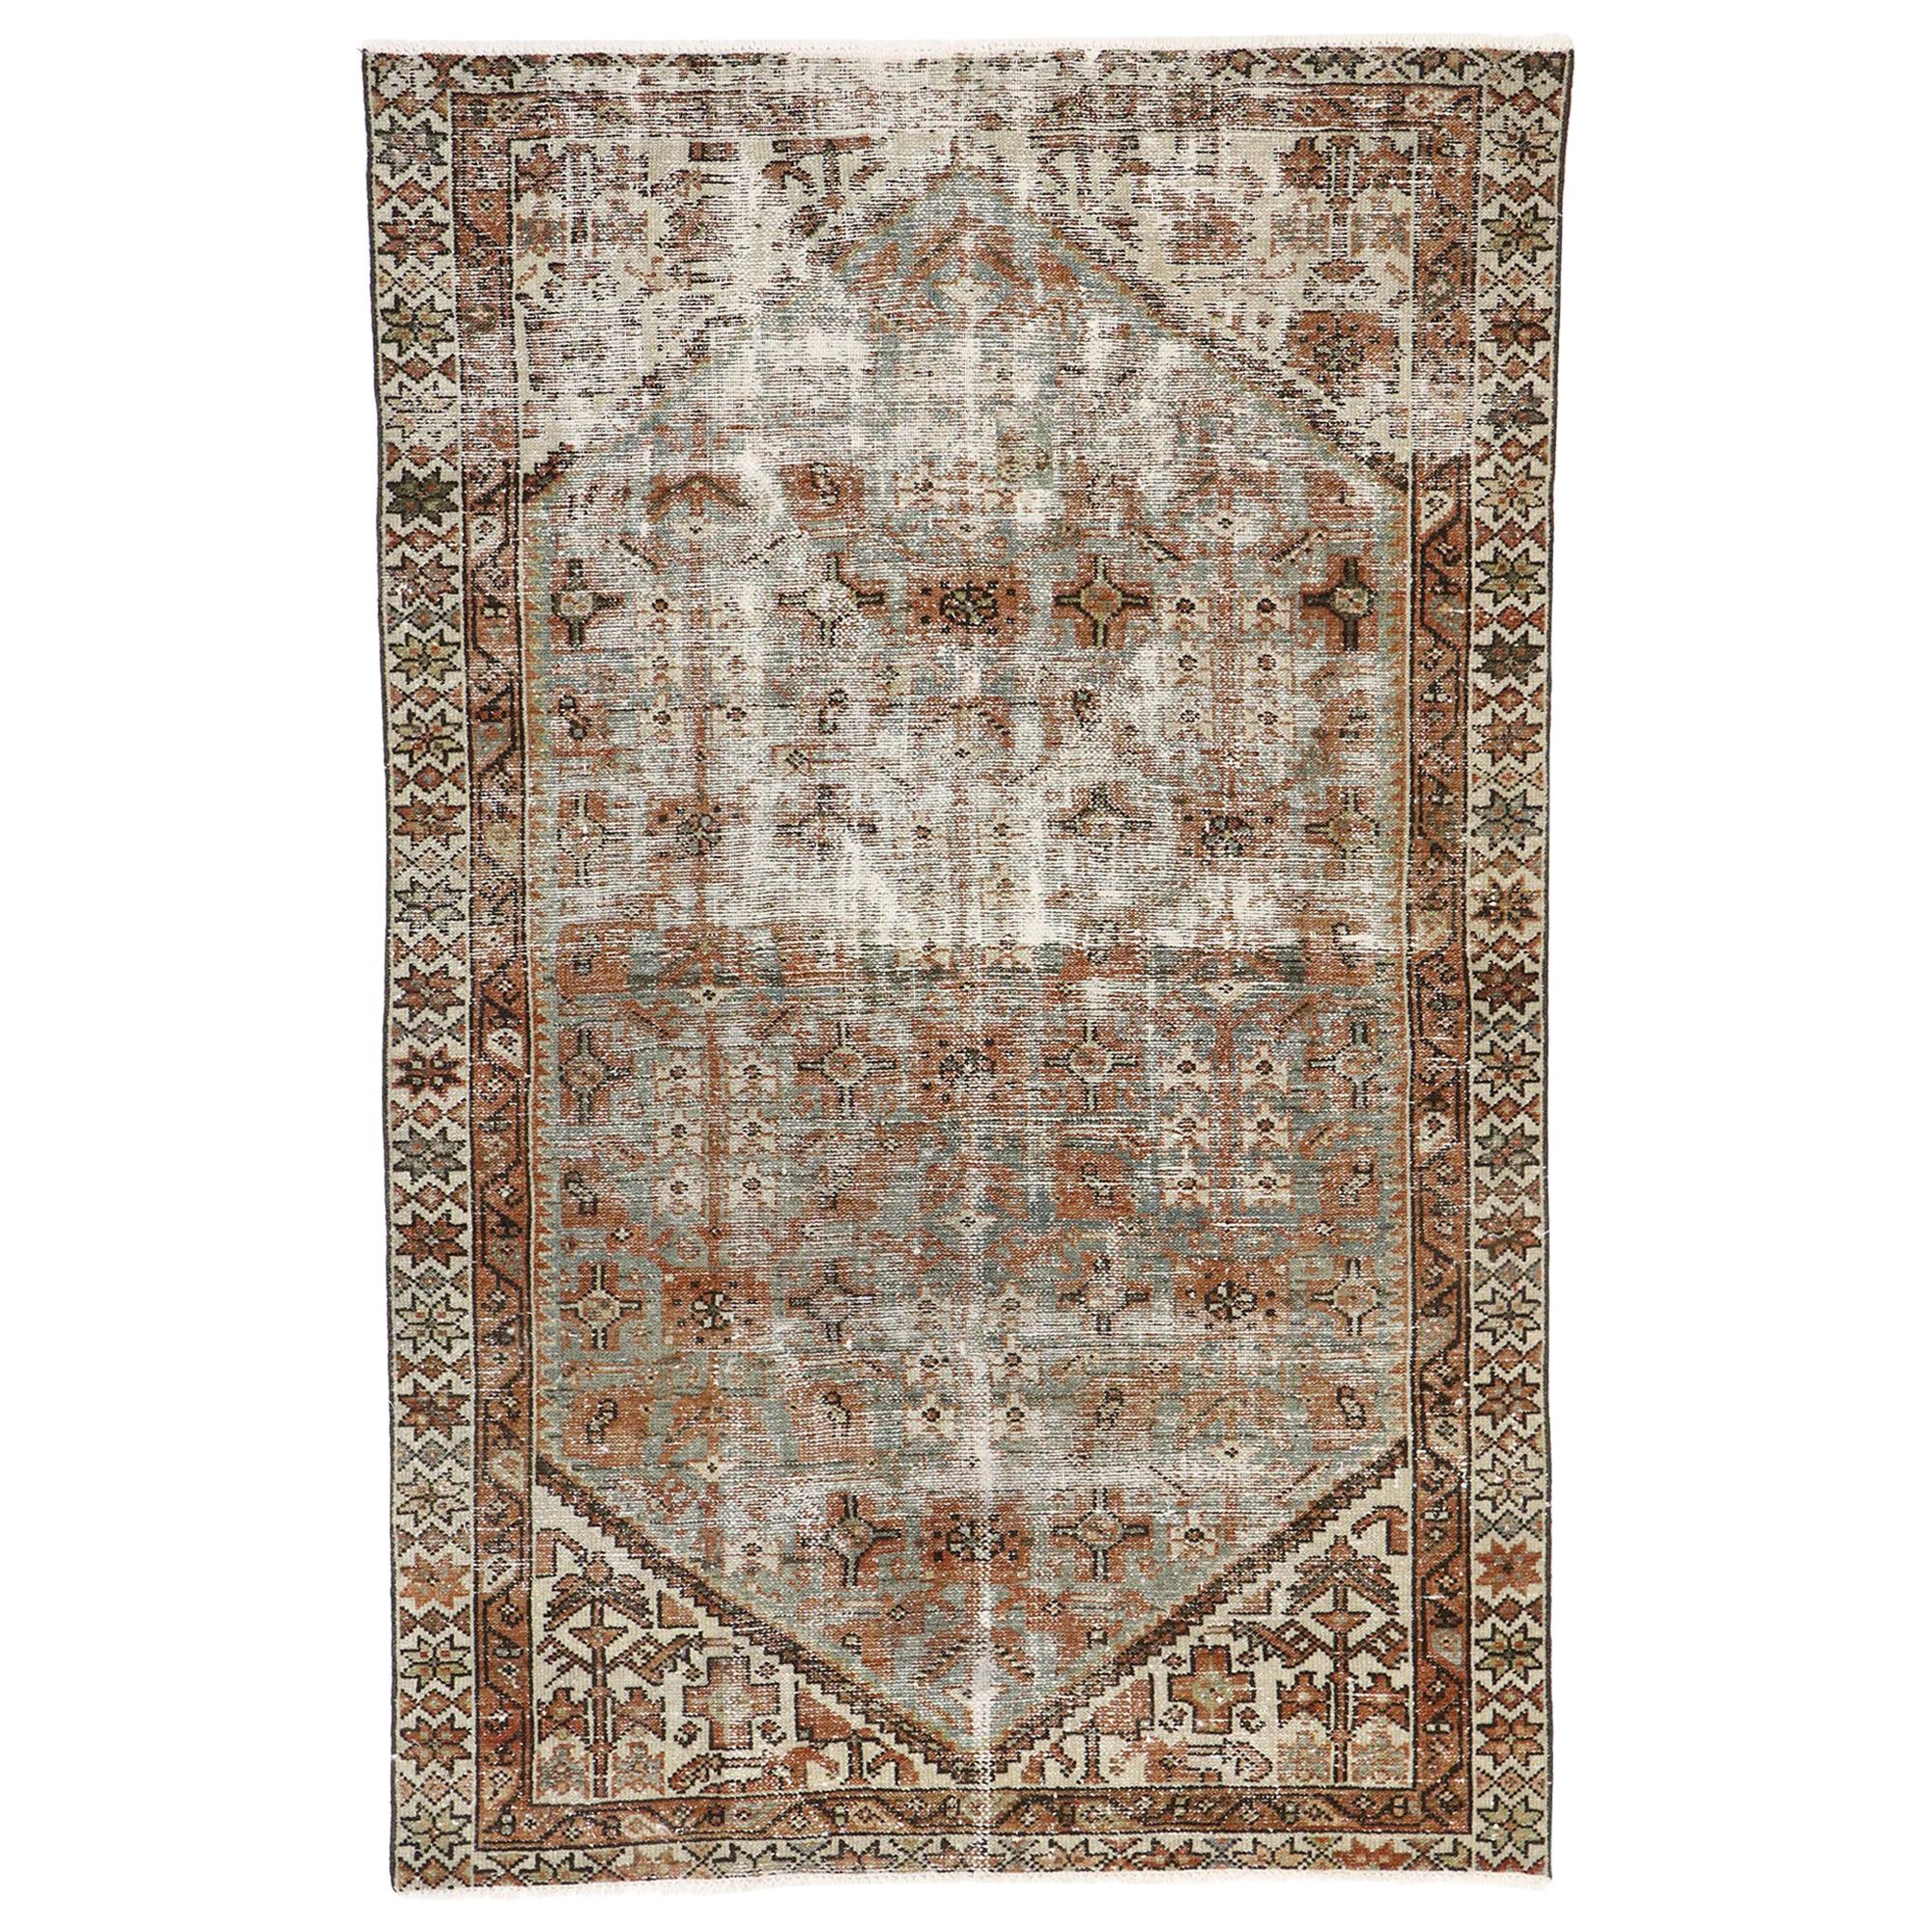 Distressed Antique Persian Hamadan Rug with Modern Rustic Artisan Style For Sale